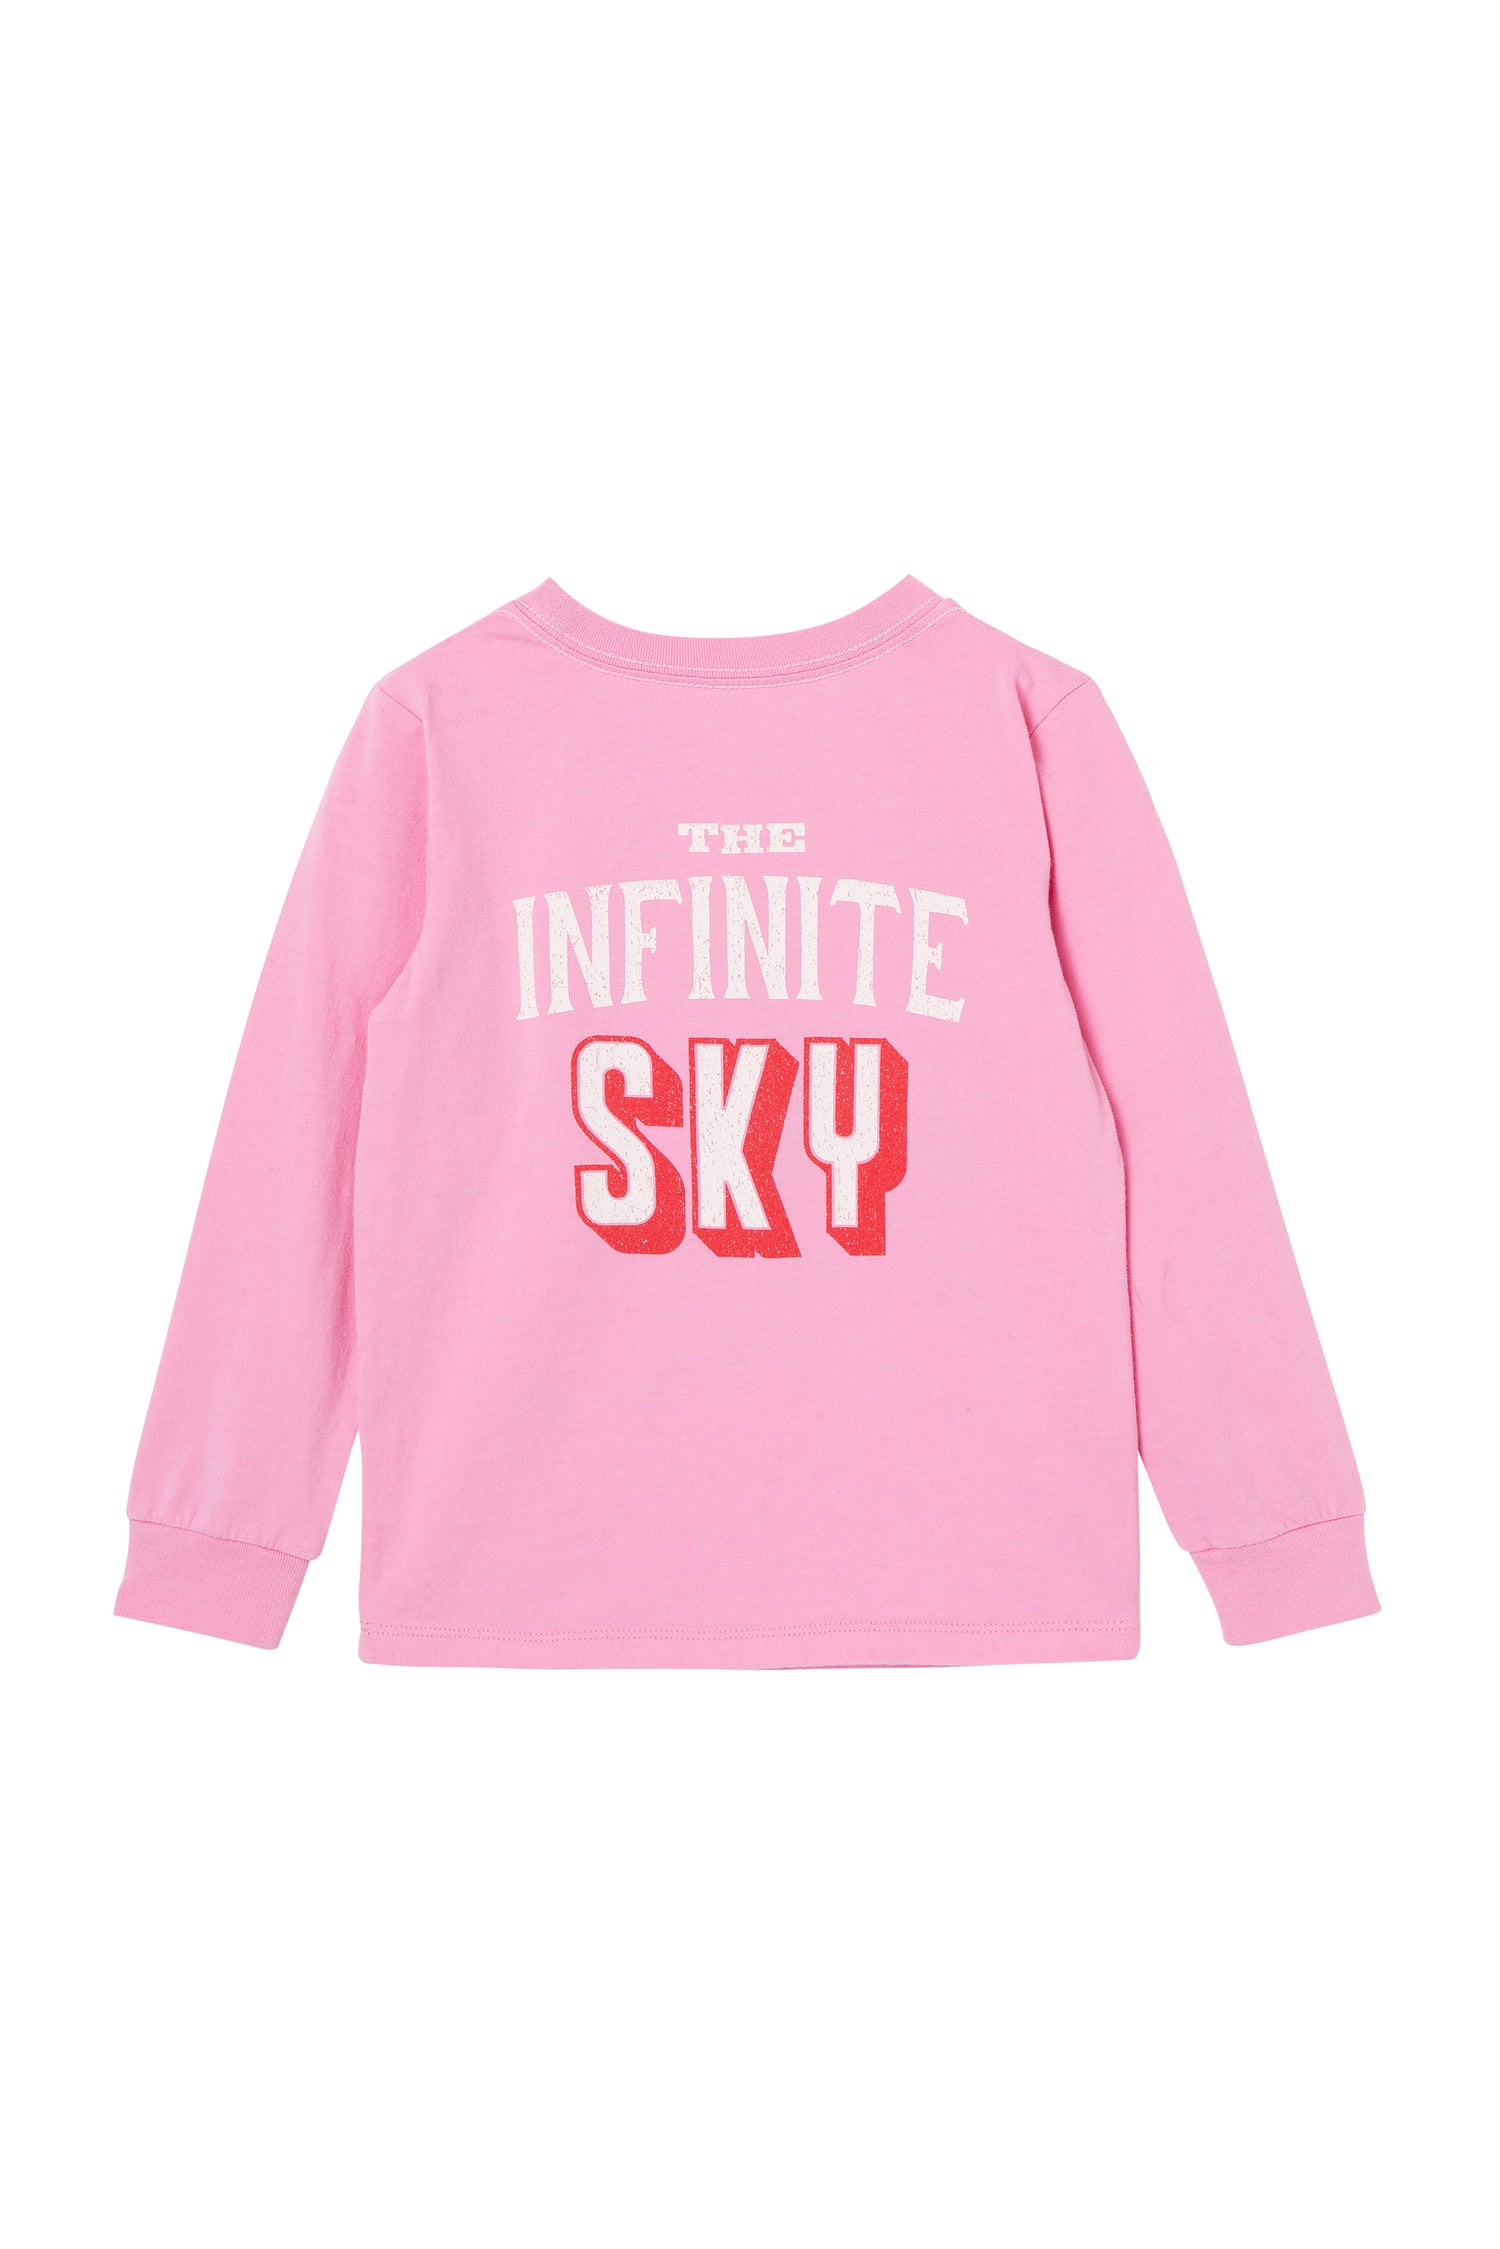 Front view of pink sweatshirt with "the infinite sky" written